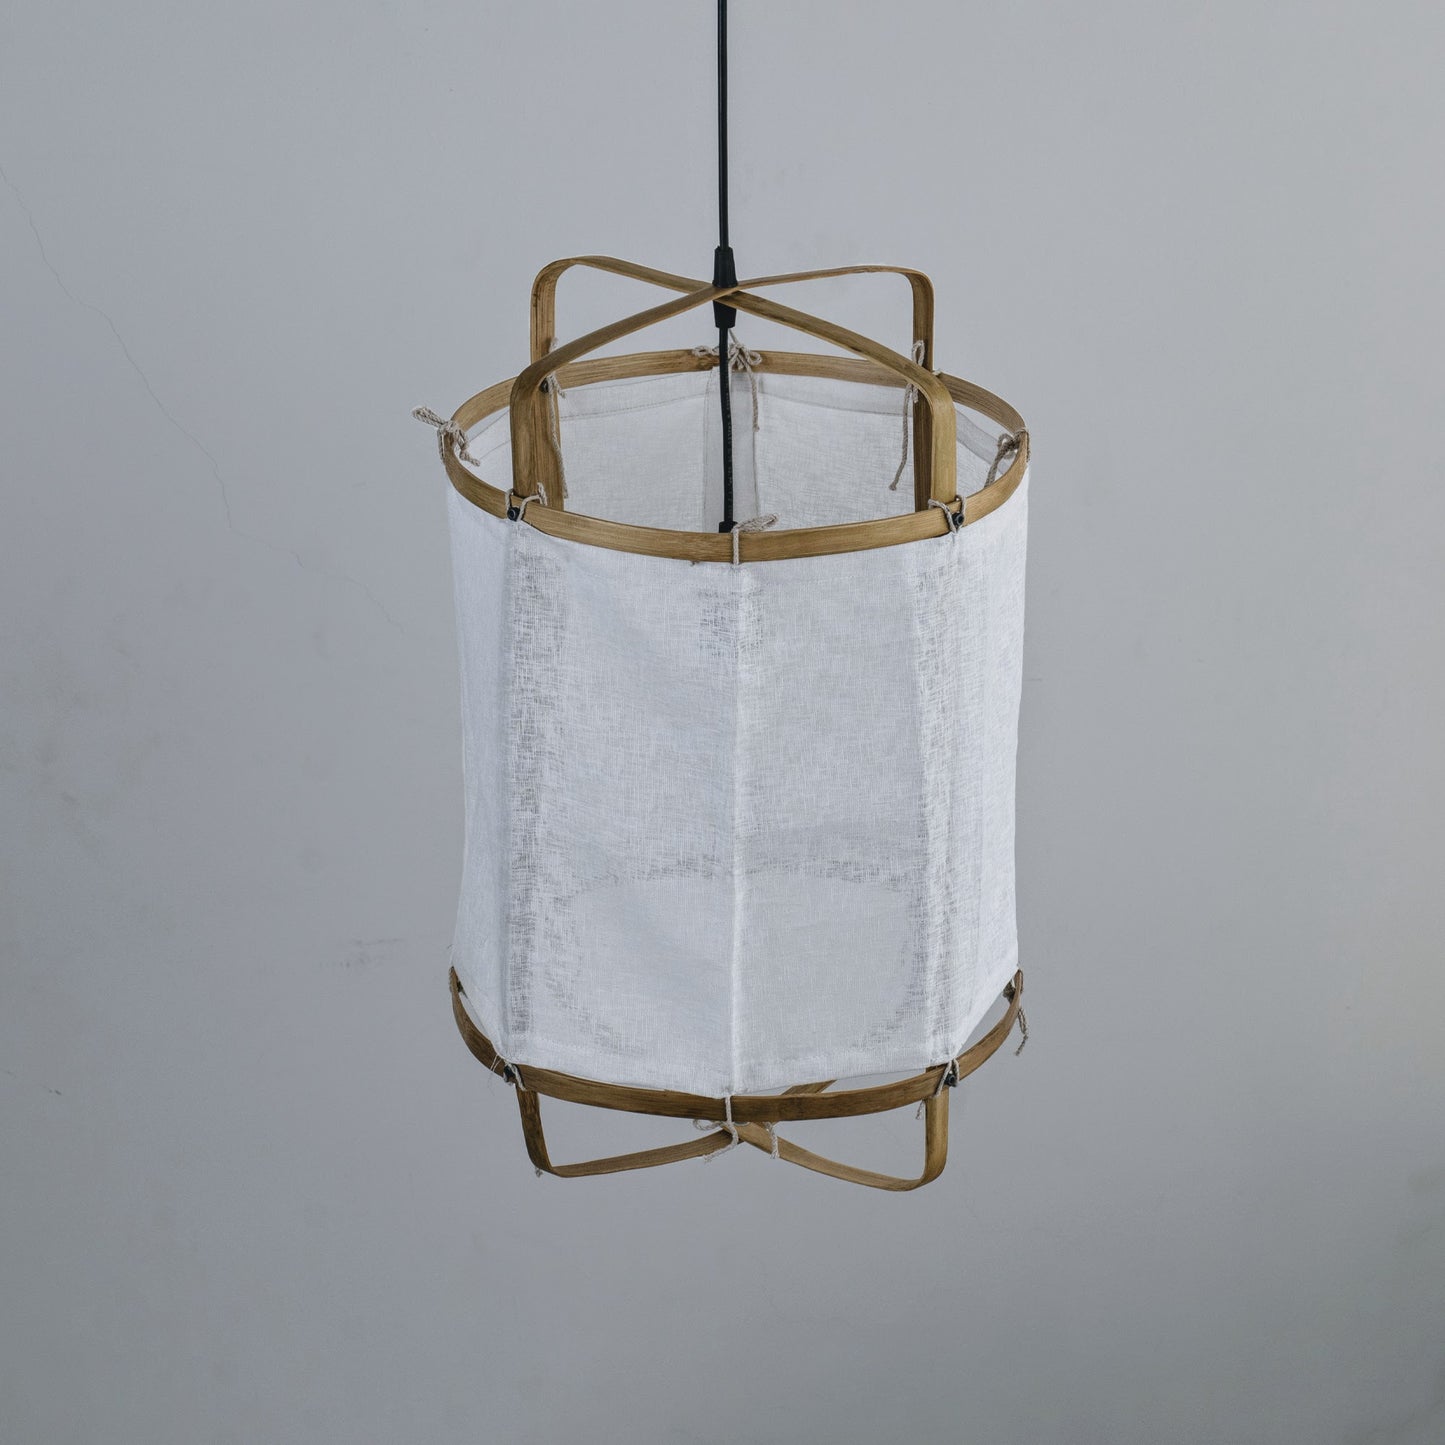 Iris- Bamboo Pendant Lamp Hanging Lamp Fabric Light, Natural/Bamboo Pendant Lamps for Home Restaurants and Offices Pendant Lamp Large and Small